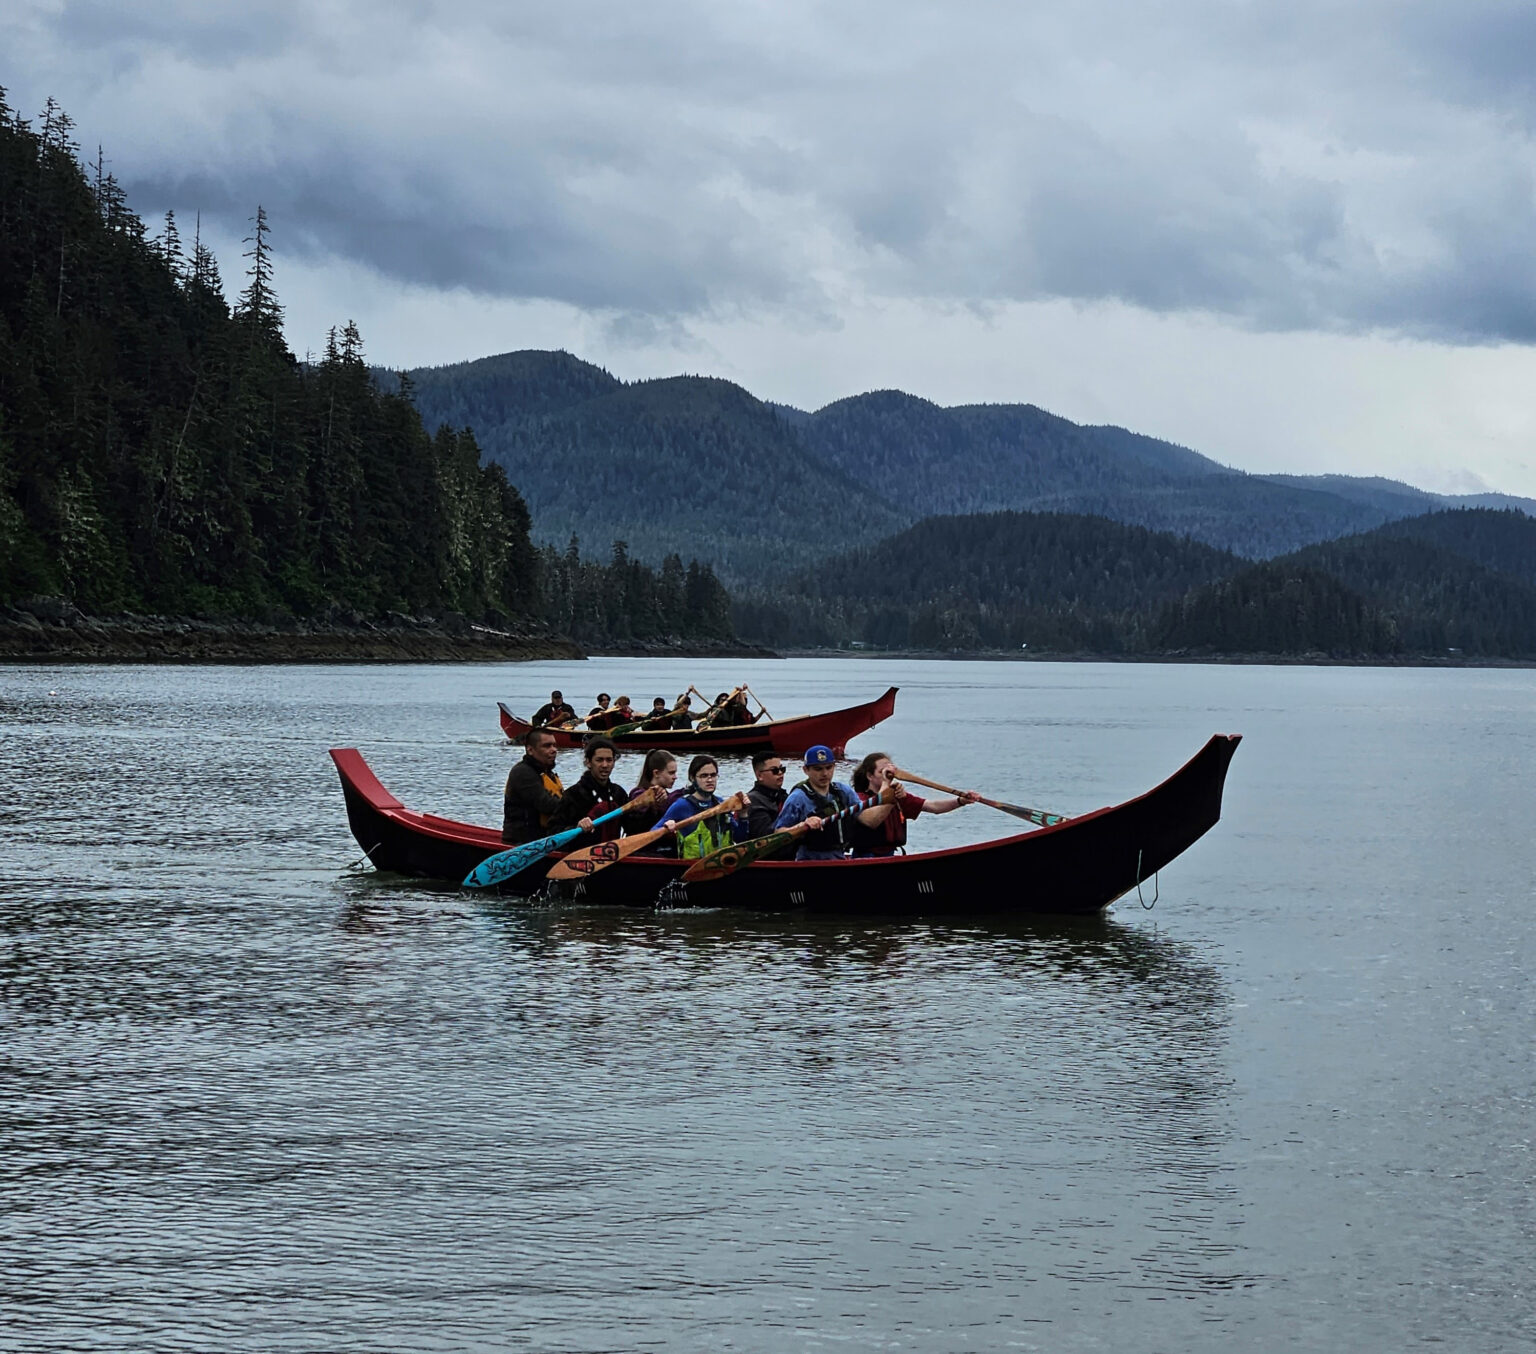 people paddle a canoe, with mountains in the background